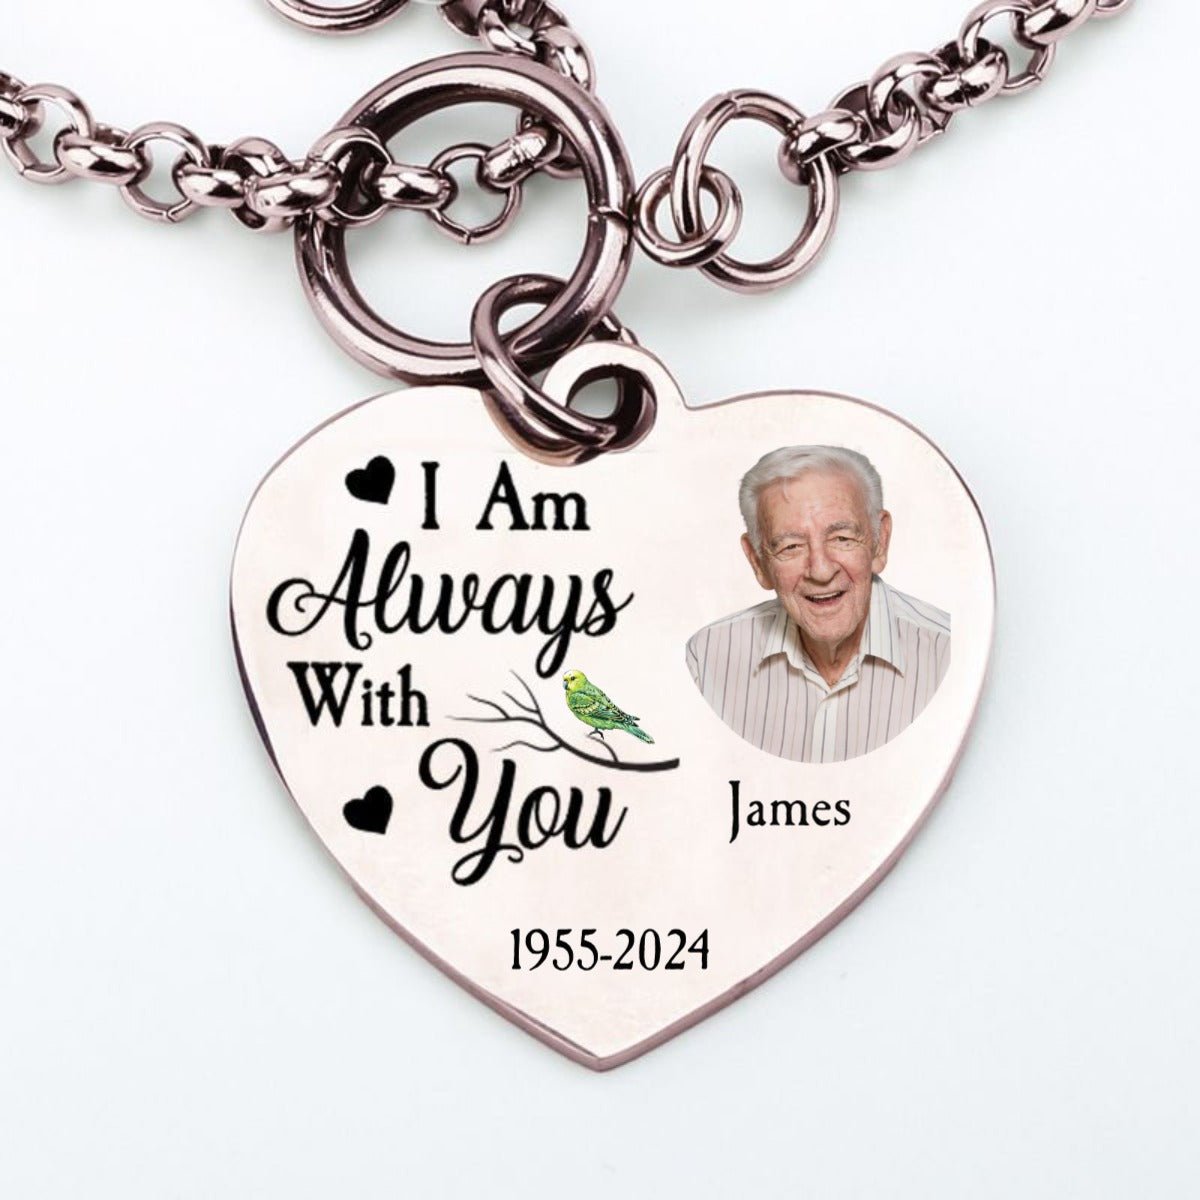 Memories - I Am Always With You - Personalized Photo Heart Bracelet - The Next Custom Gift